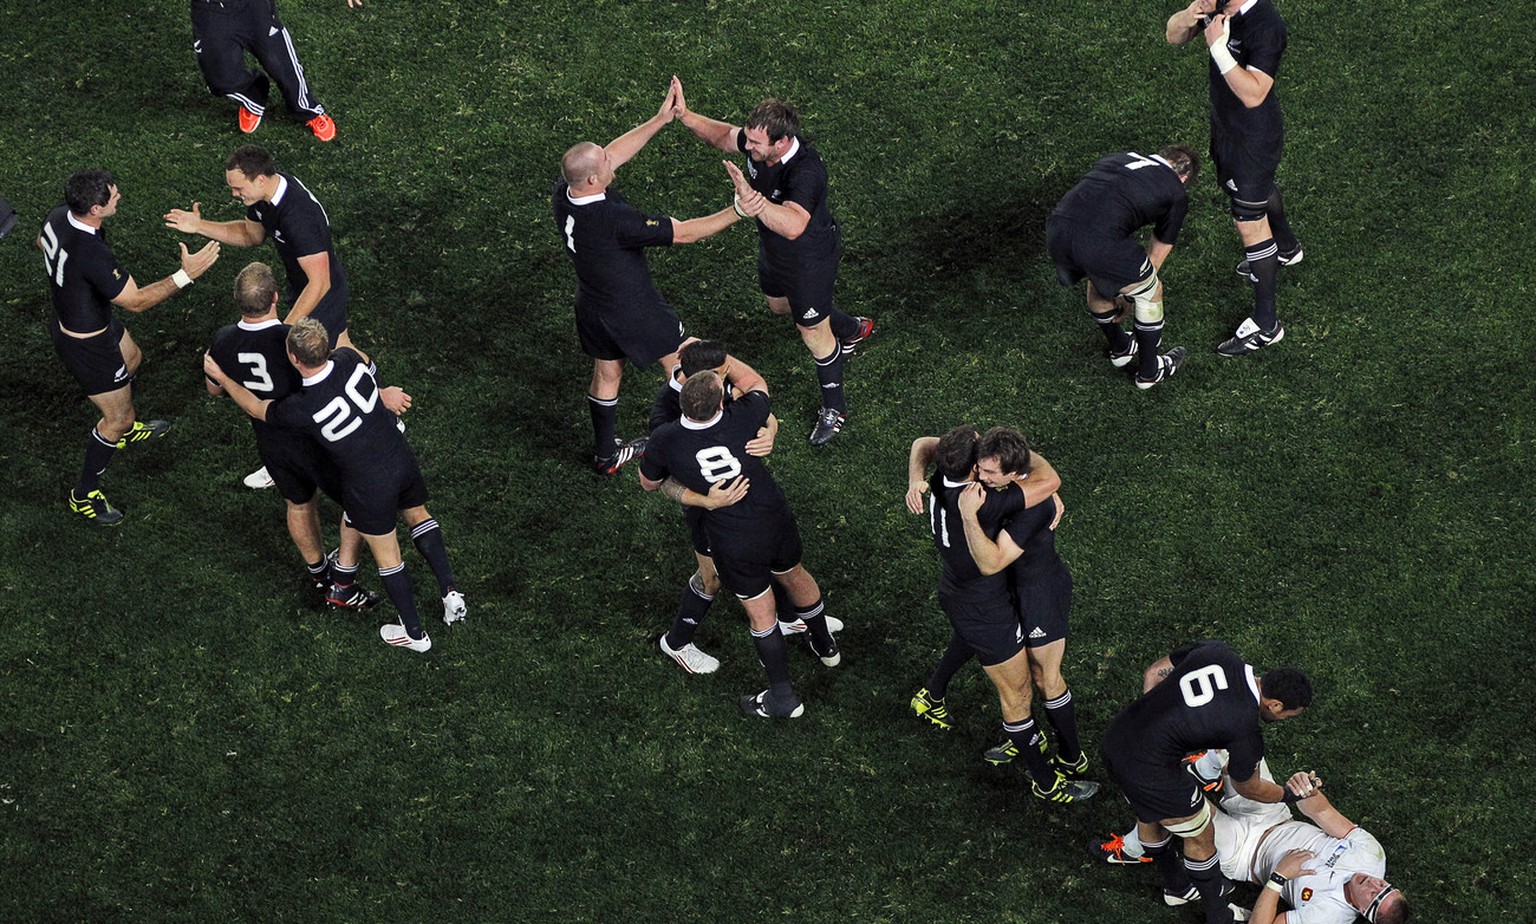 New Zealand All Blacks Jerome Kaino helps up France&#039;s Imanol Harinordoquy as his teammates celebrate after their Rugby World Cup final win over France at Eden Park in Auckland, New Zealand, Sunda ...